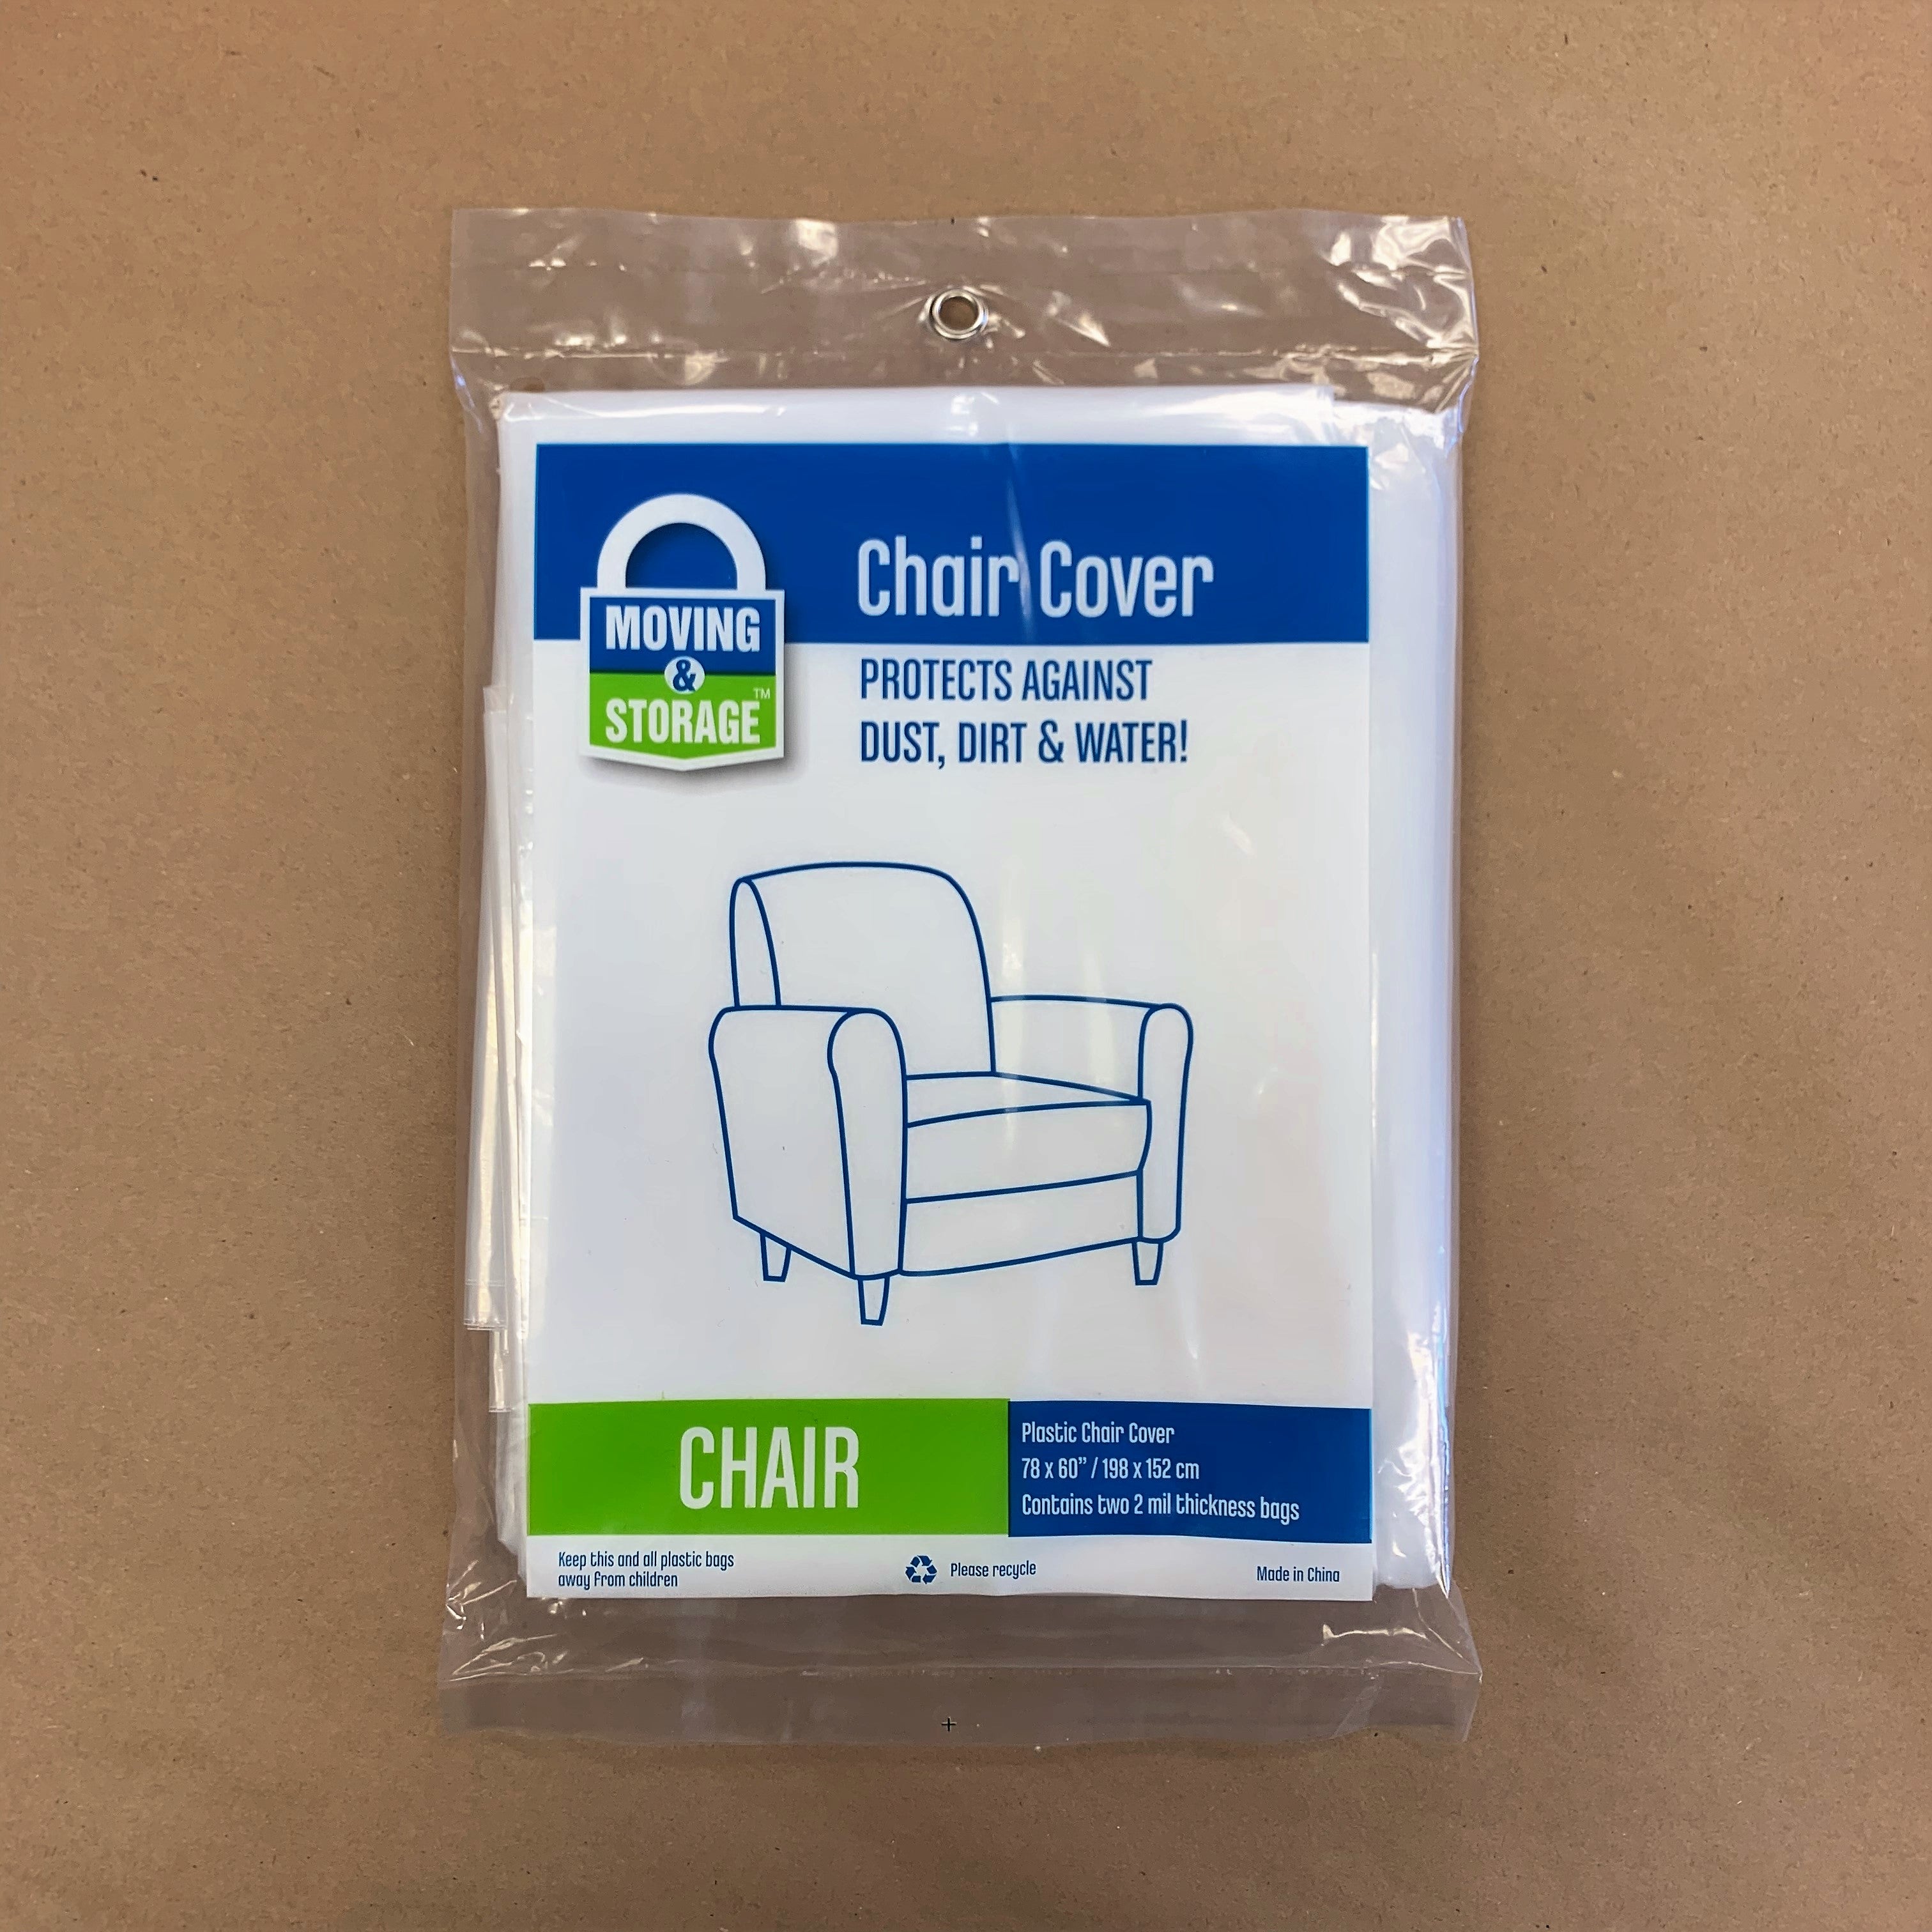 Chair Covers - 2 mil